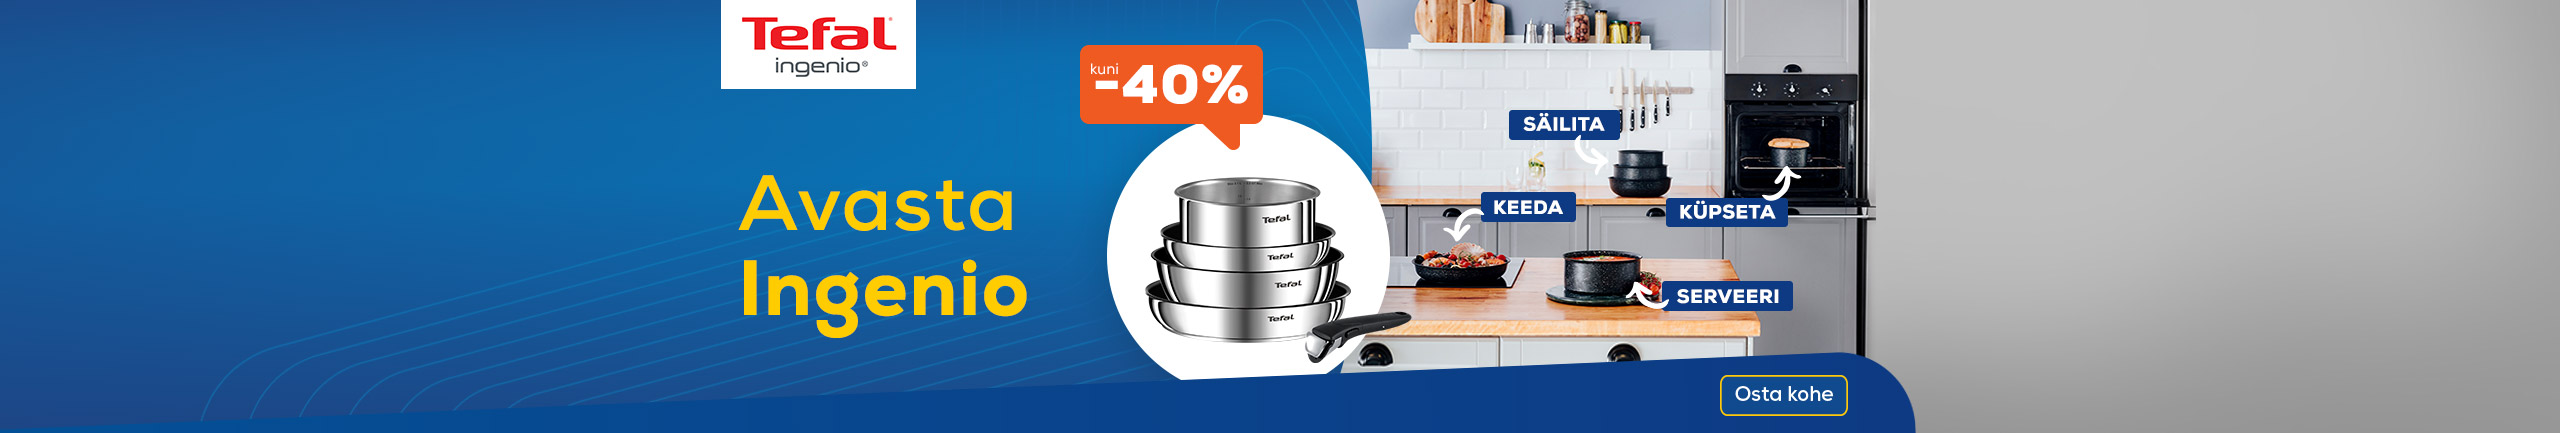 Tefal Ingenio up to - 40%